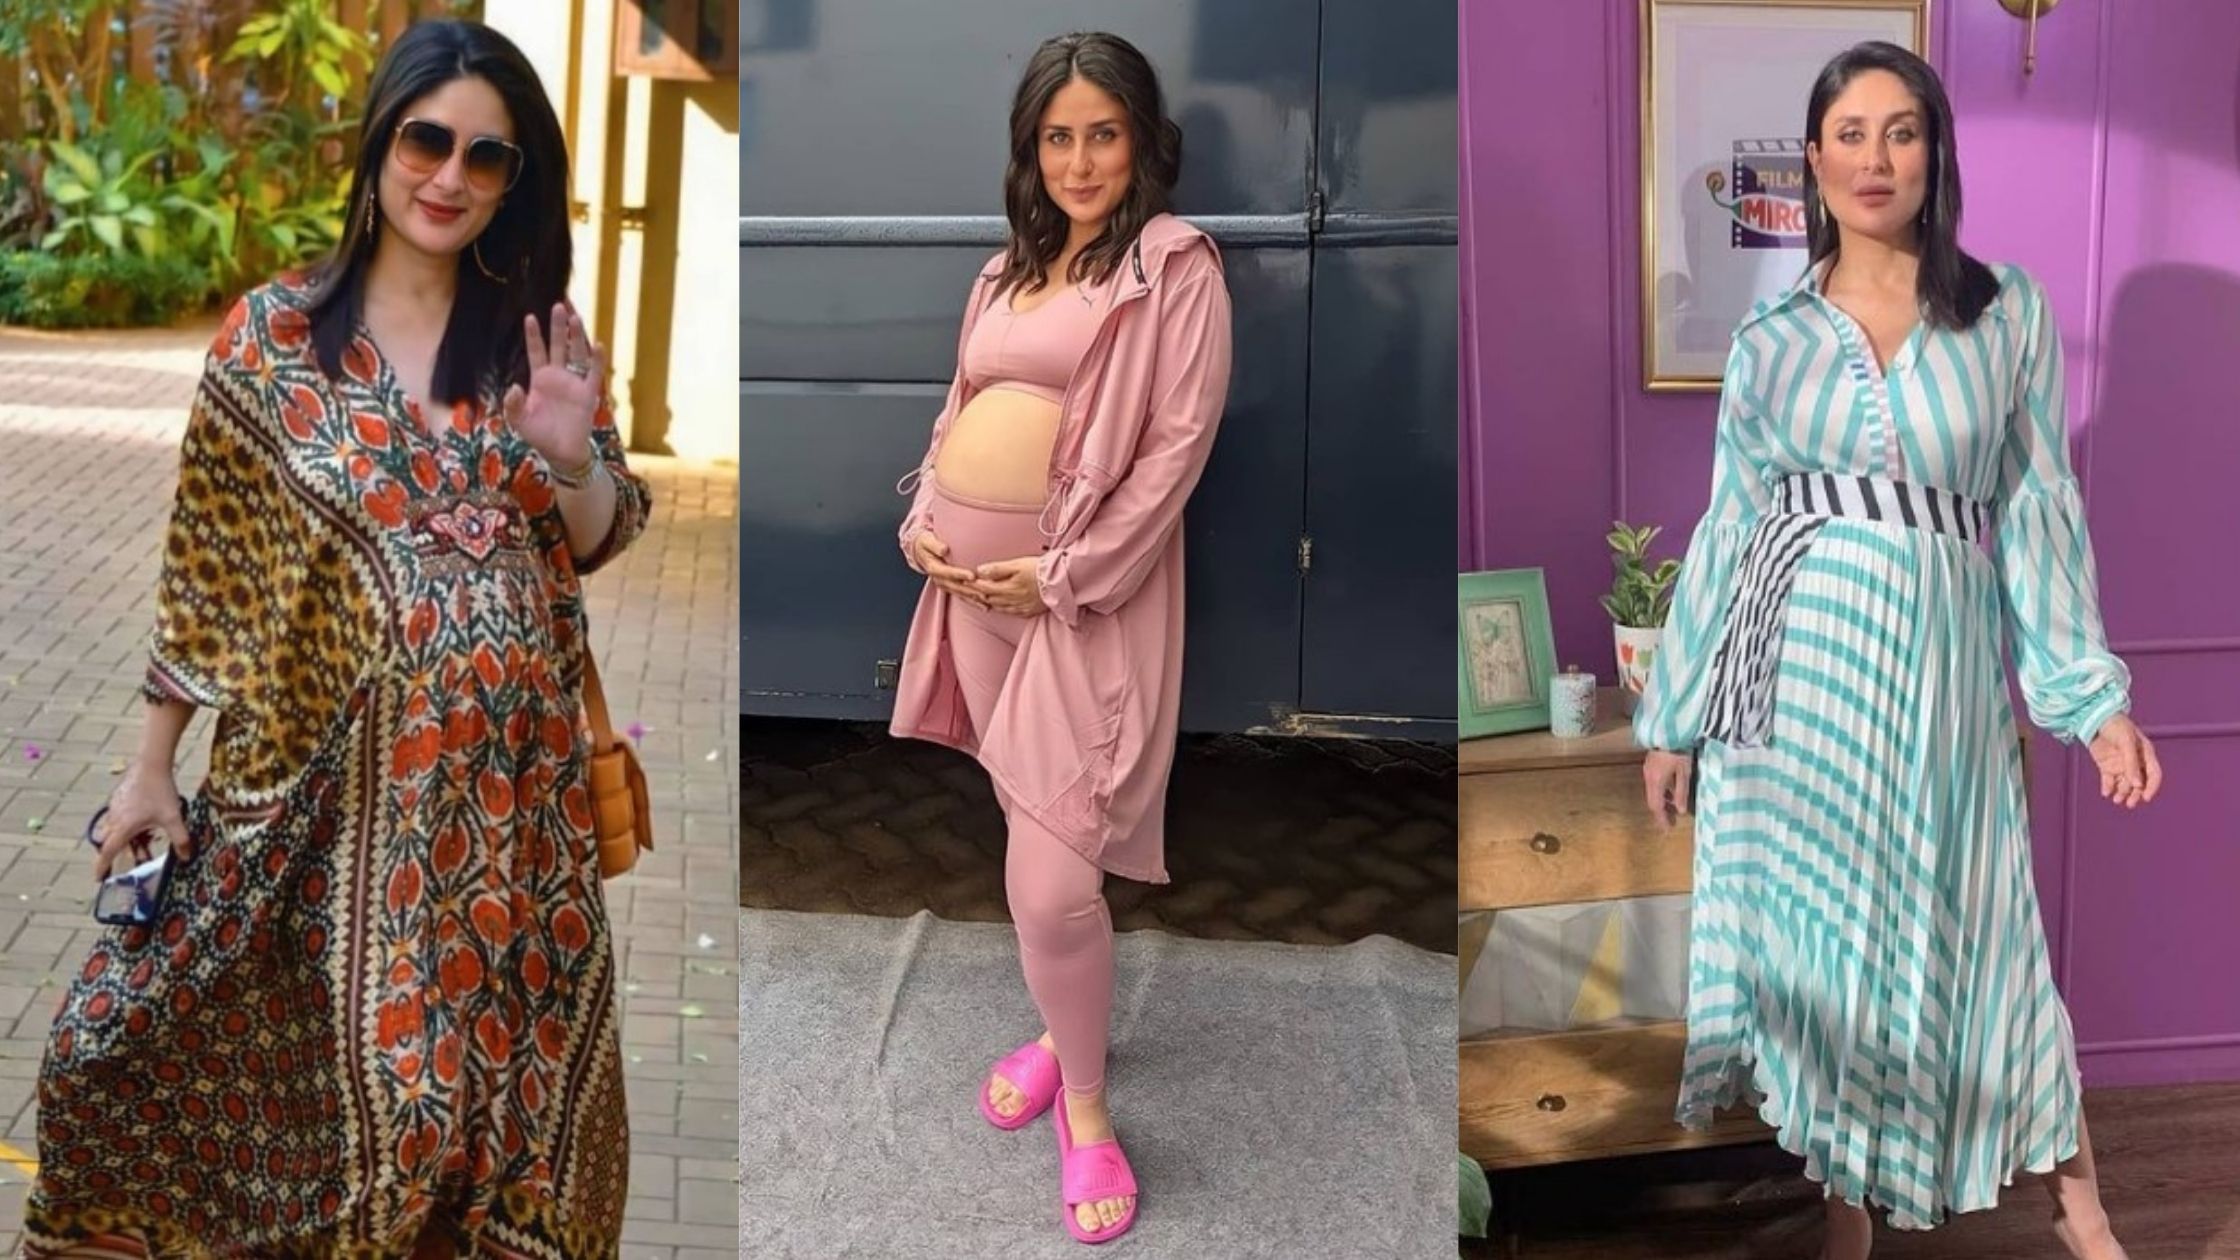 A look at Kareena Kapoor Khan’s fashion journey during her second pregnancy